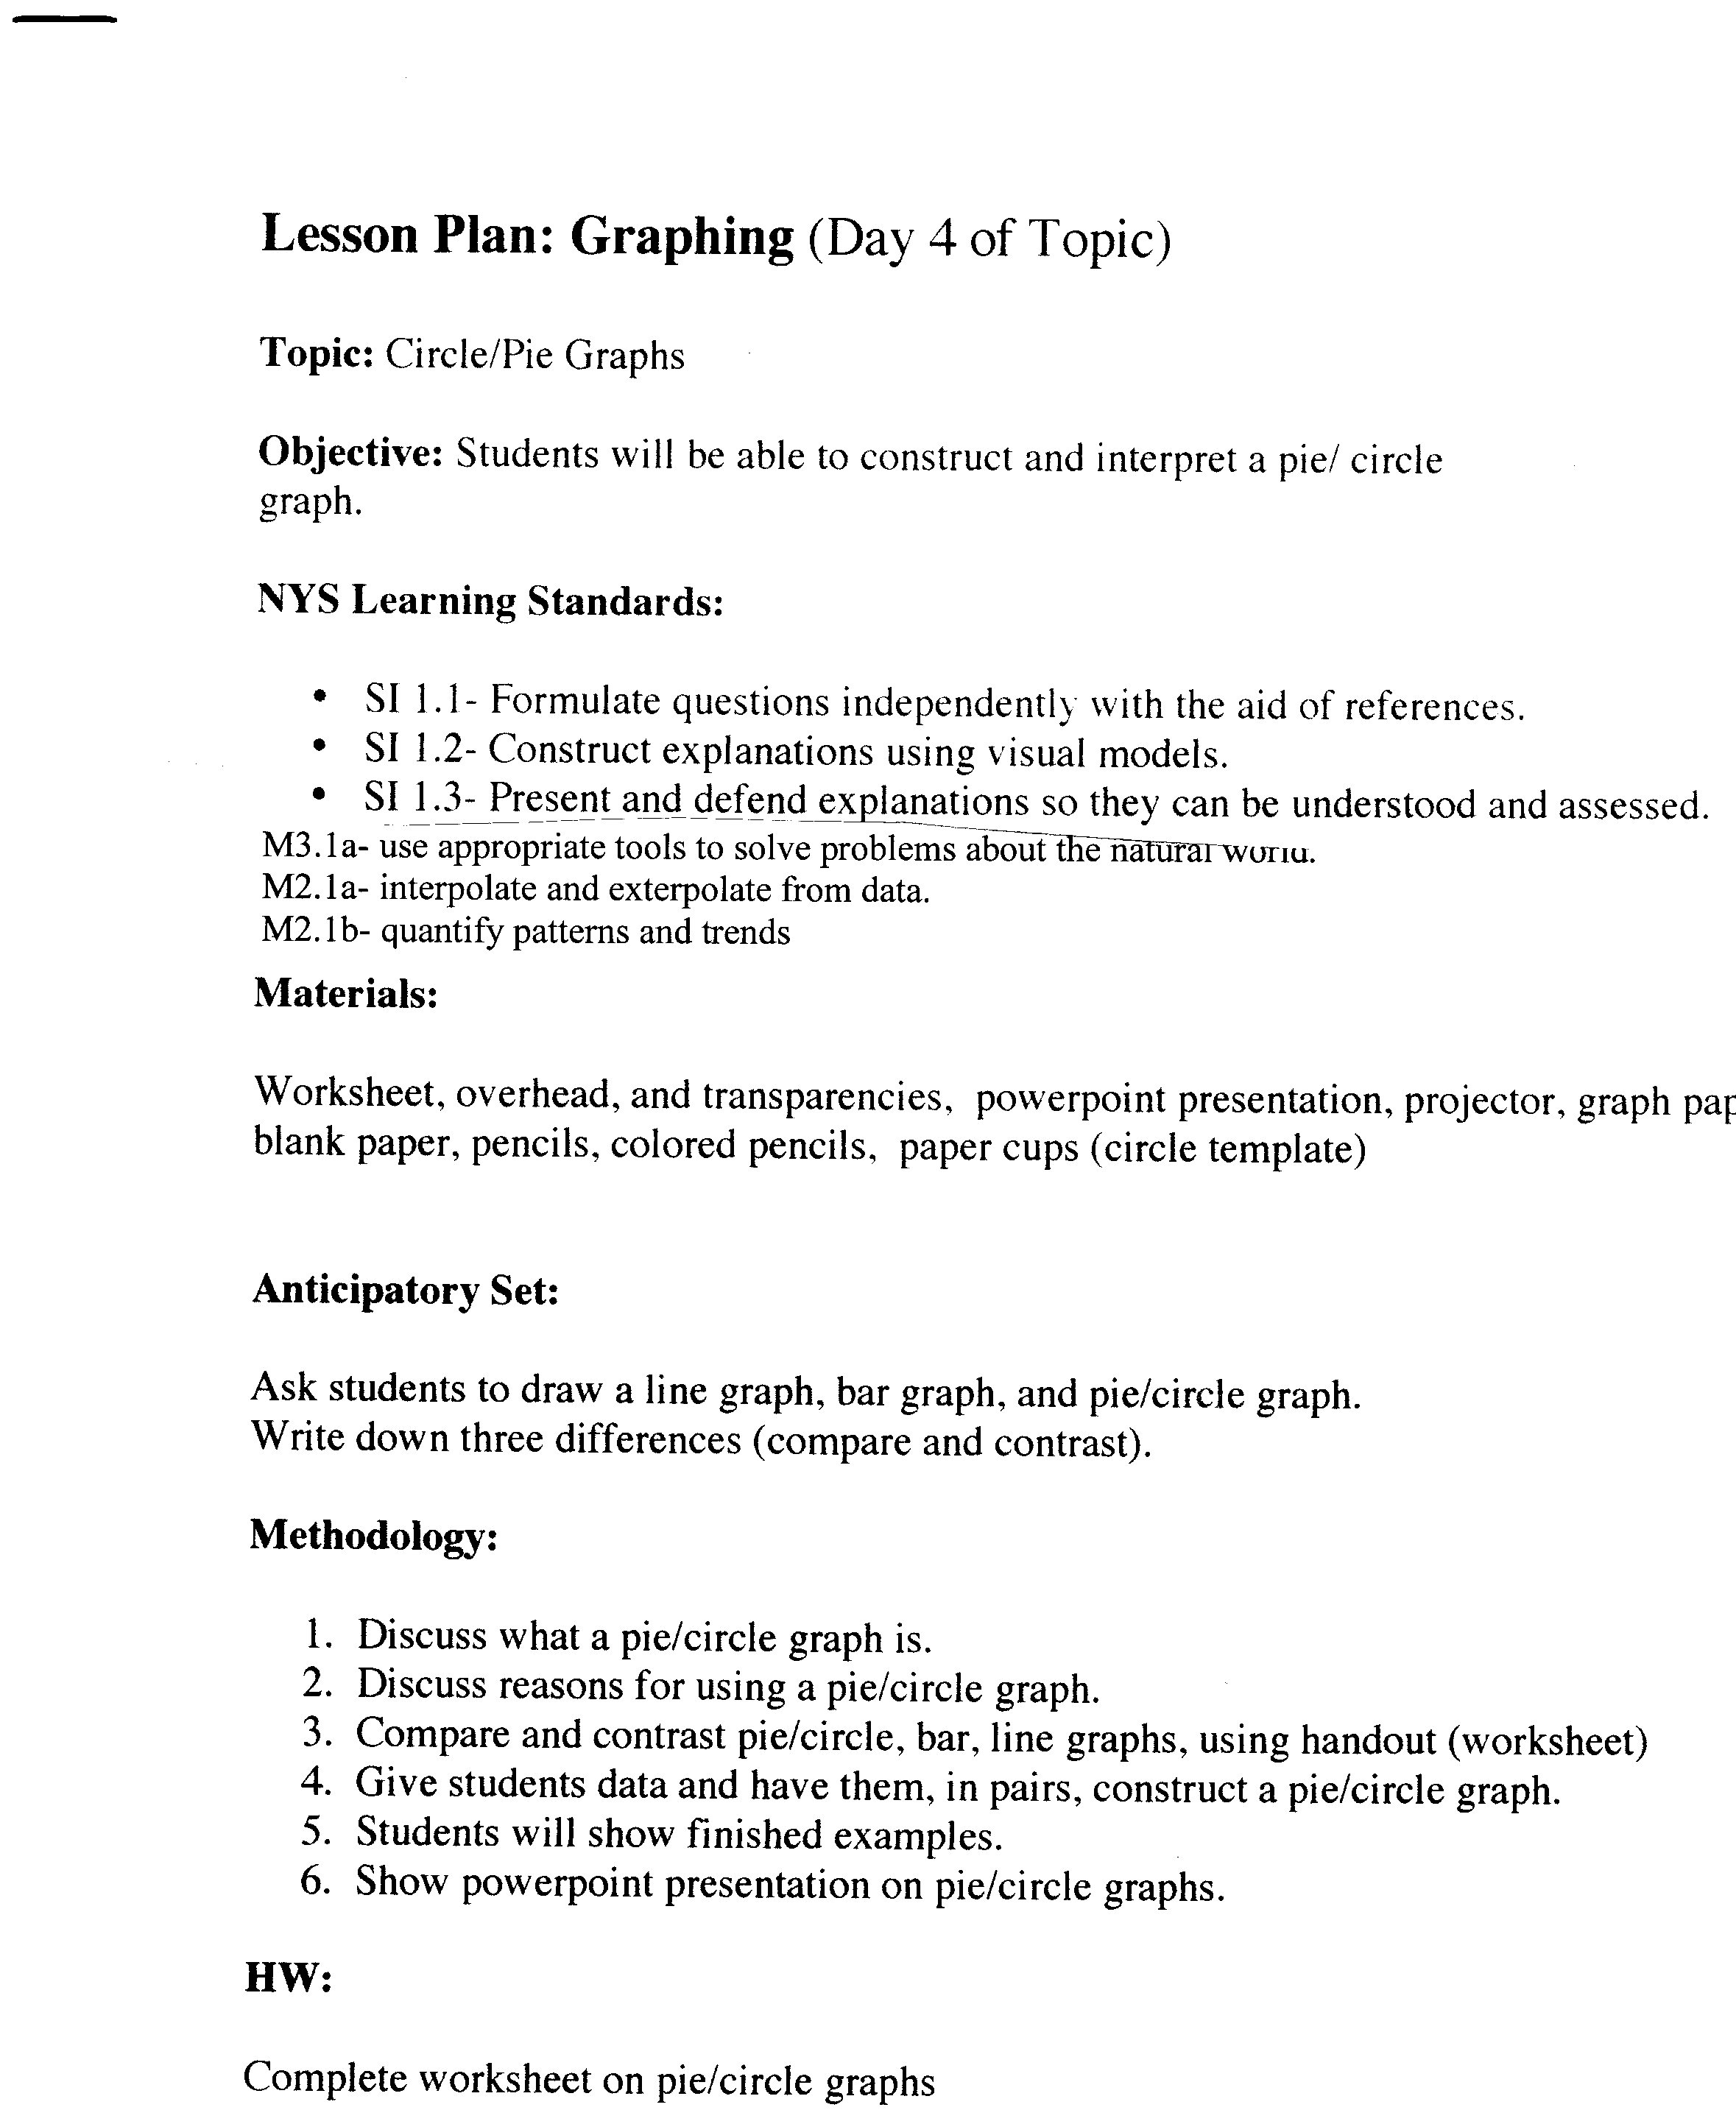 graphing-skills-answer-key-graphing-and-analyzing-scientific-data-answer-key-worksheets-2019